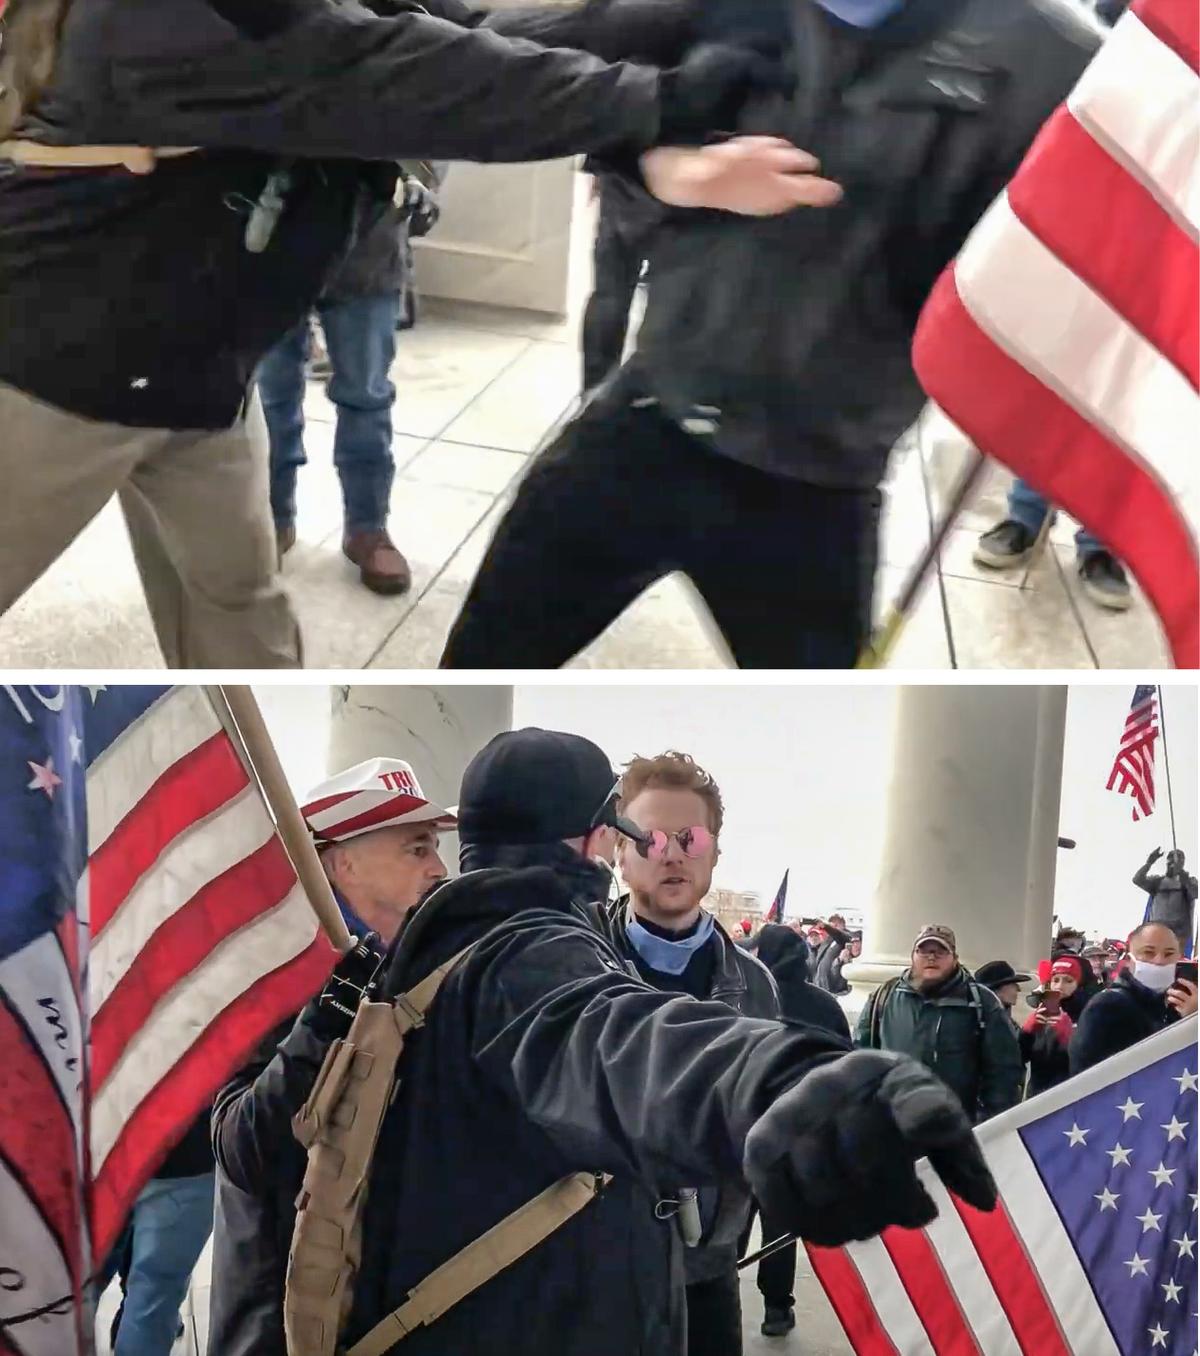 A man who had just pulled a pane of glass out of a Capitol window shoves Gavin Crowl of Lincoln, Nebraska, and accuses him of the vandalism. (Bobby Powell/Screenshots via The Epoch Times)